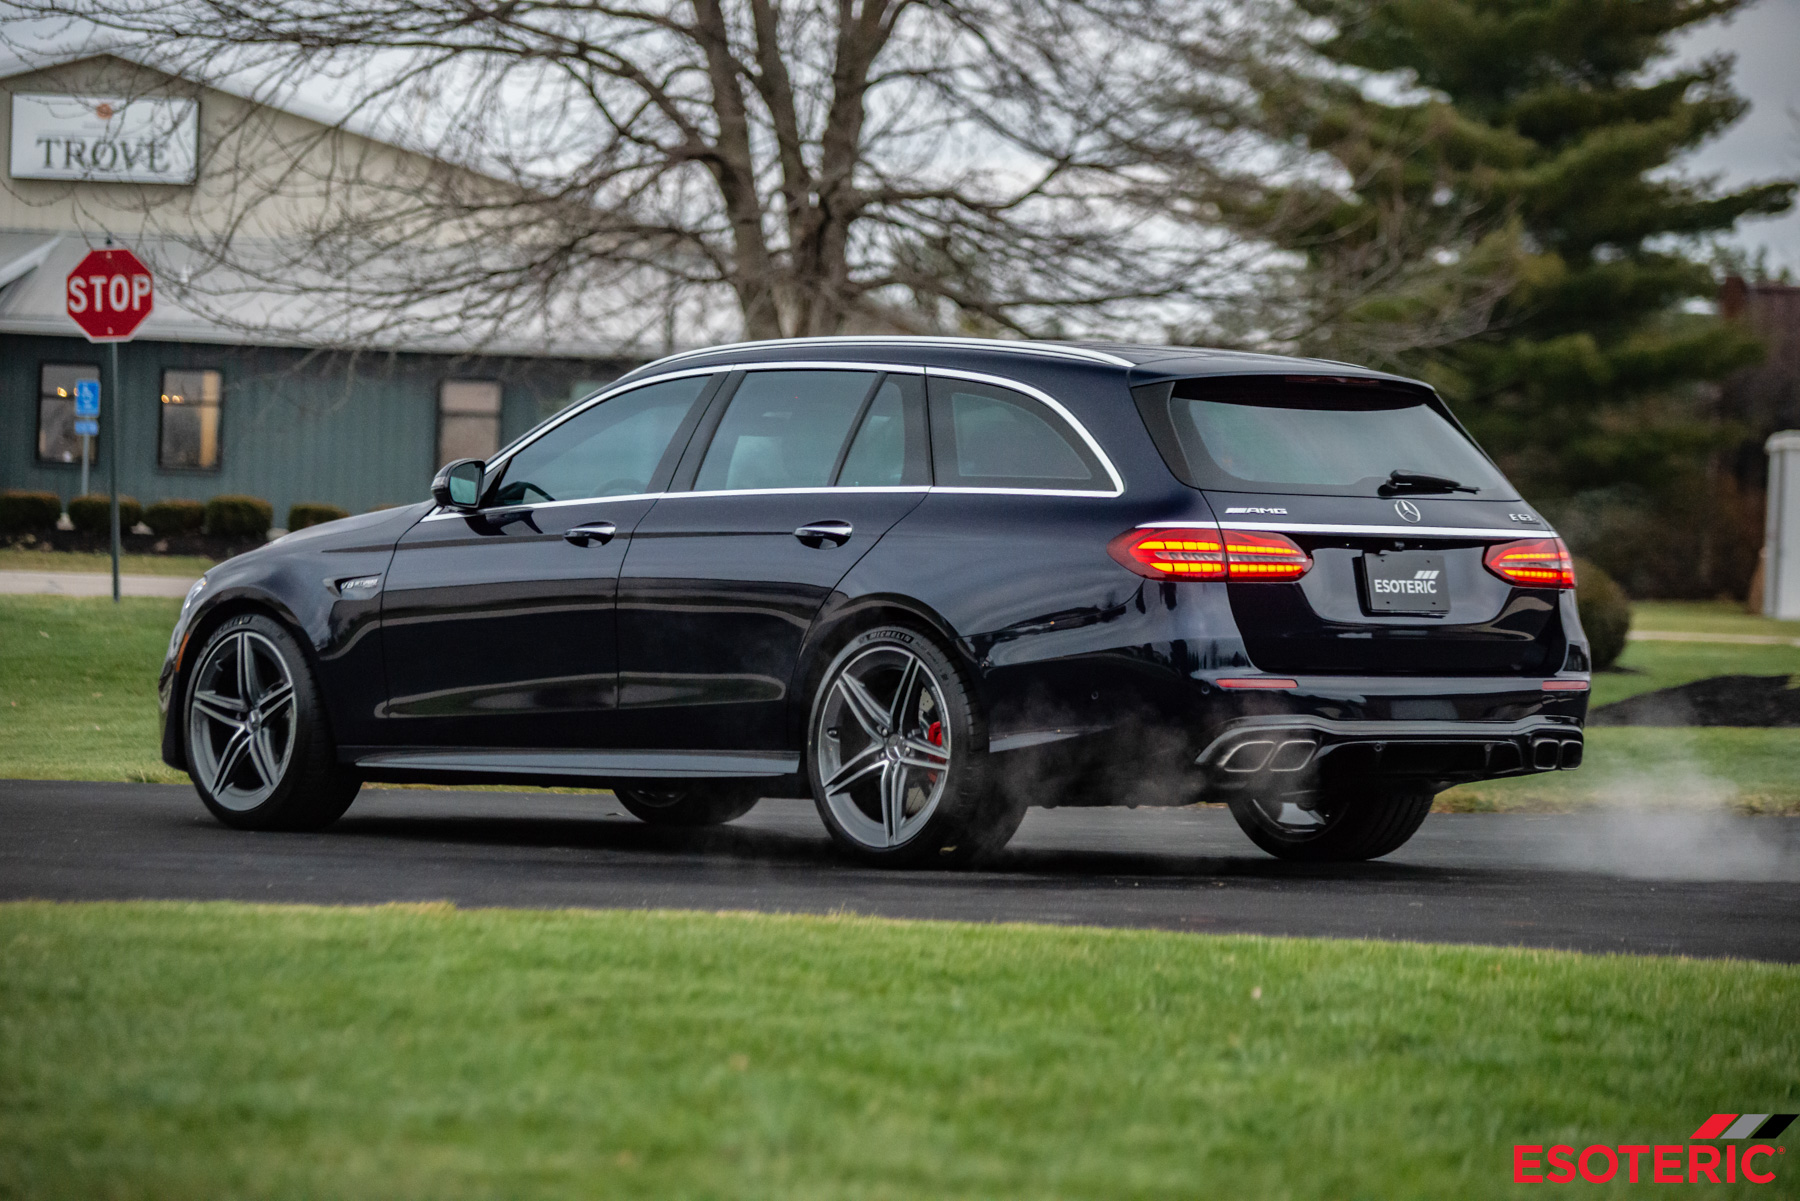 Wagon Alert: 600 Horsepower Perfected & Protected – Photo Gallery